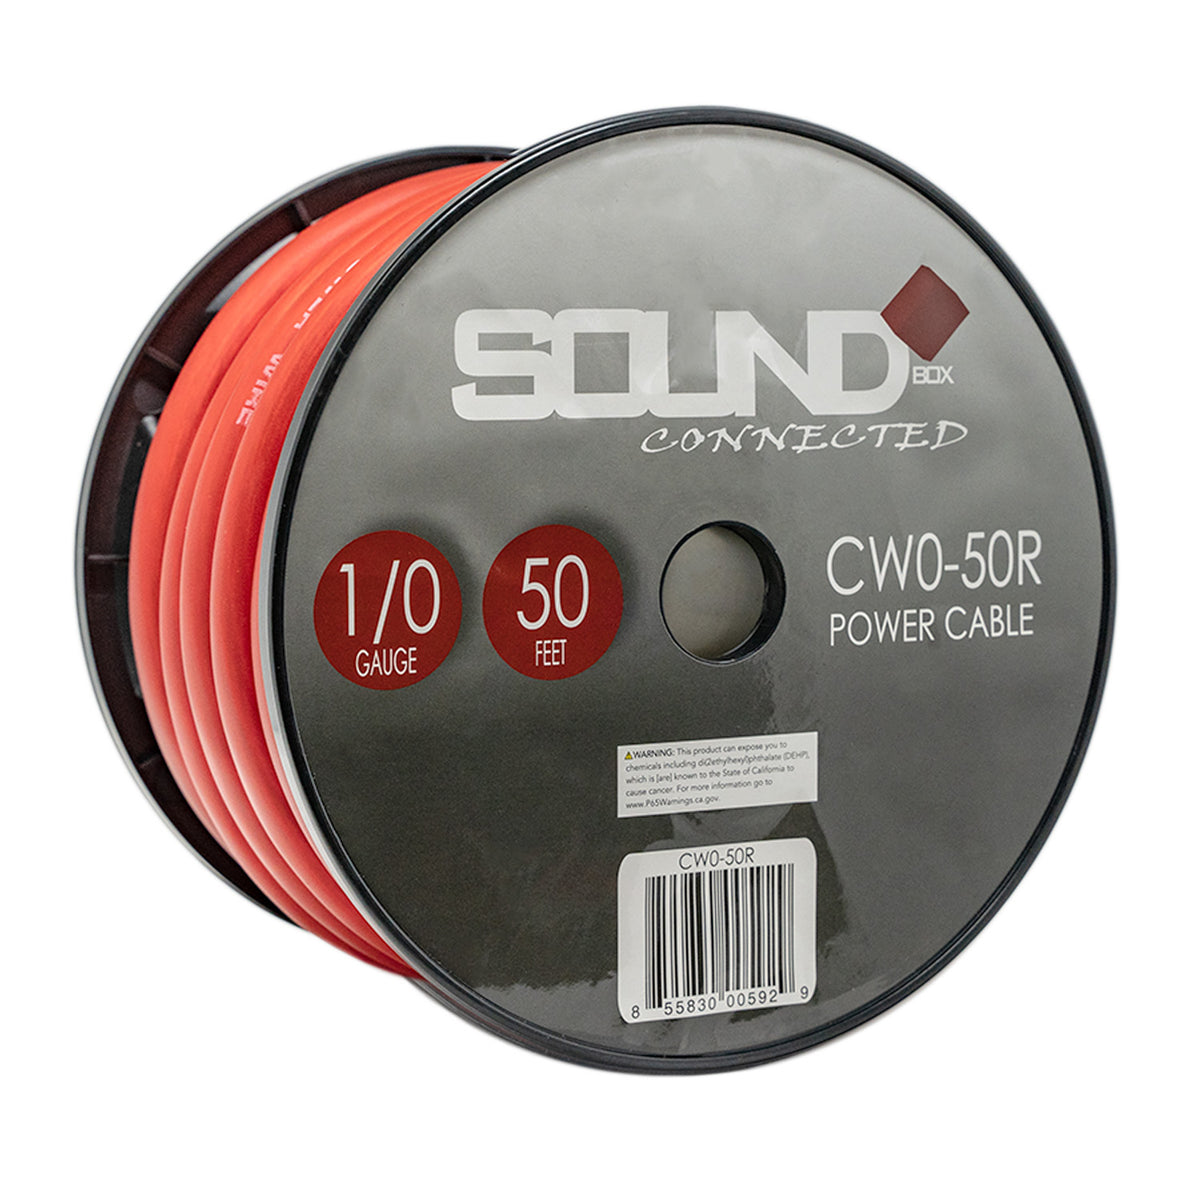 Connected 0 Gauge CCA Power Wire 50' Spool- Red